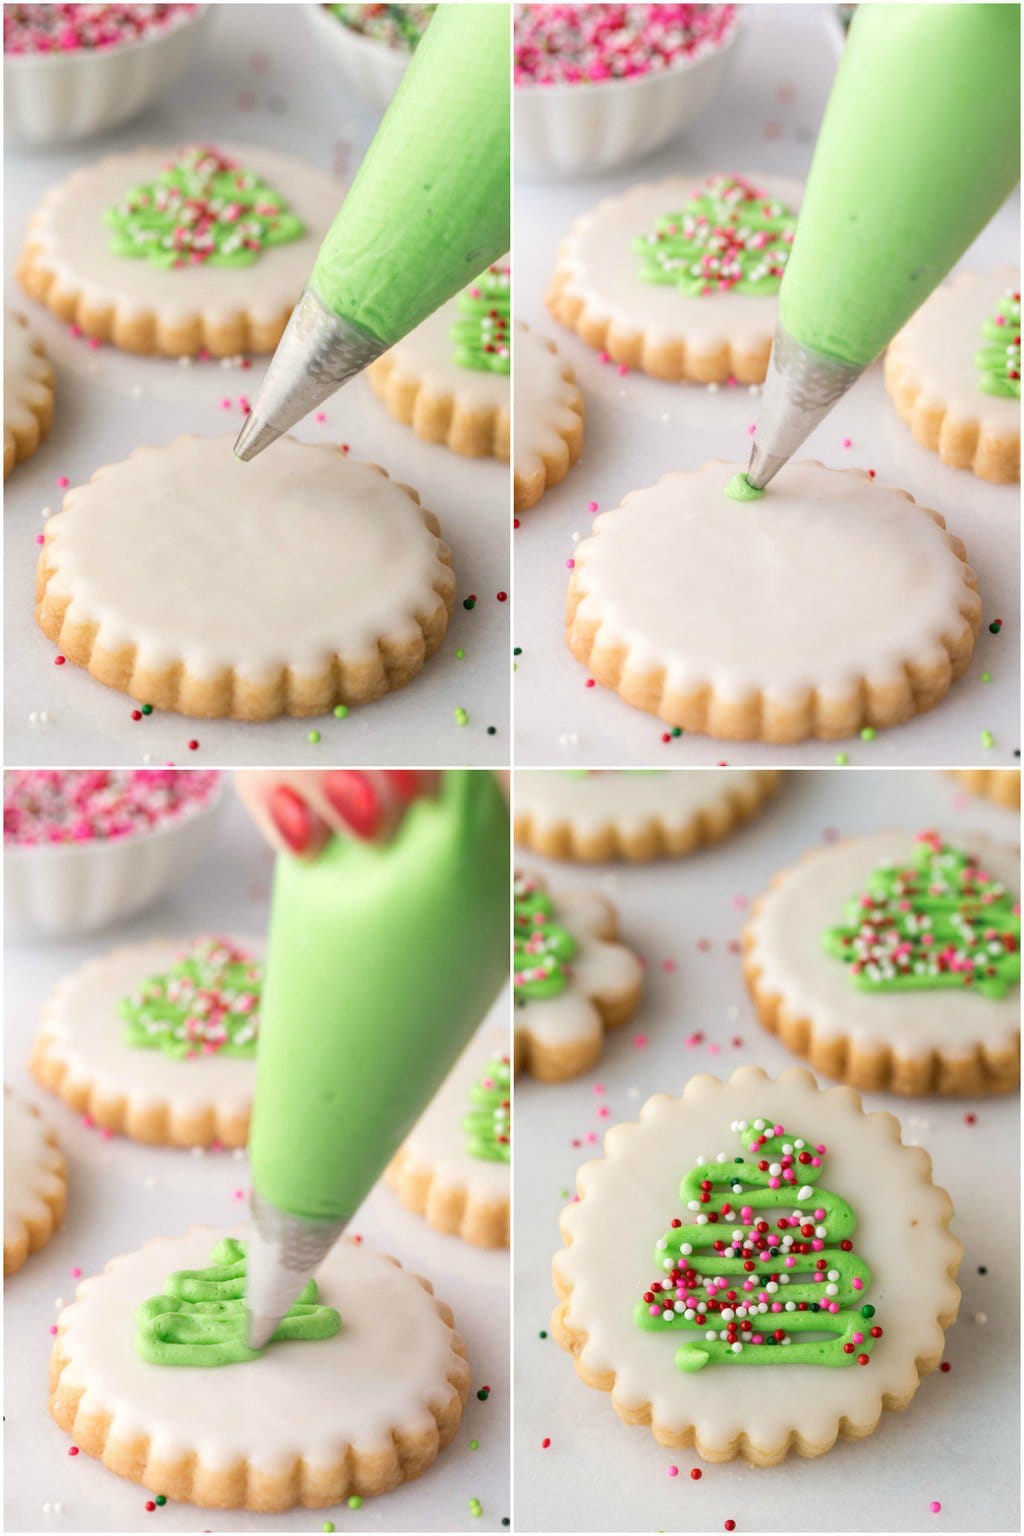 How-to collage of decorating with icing a bunch of Christmas Shortbread Cookies.